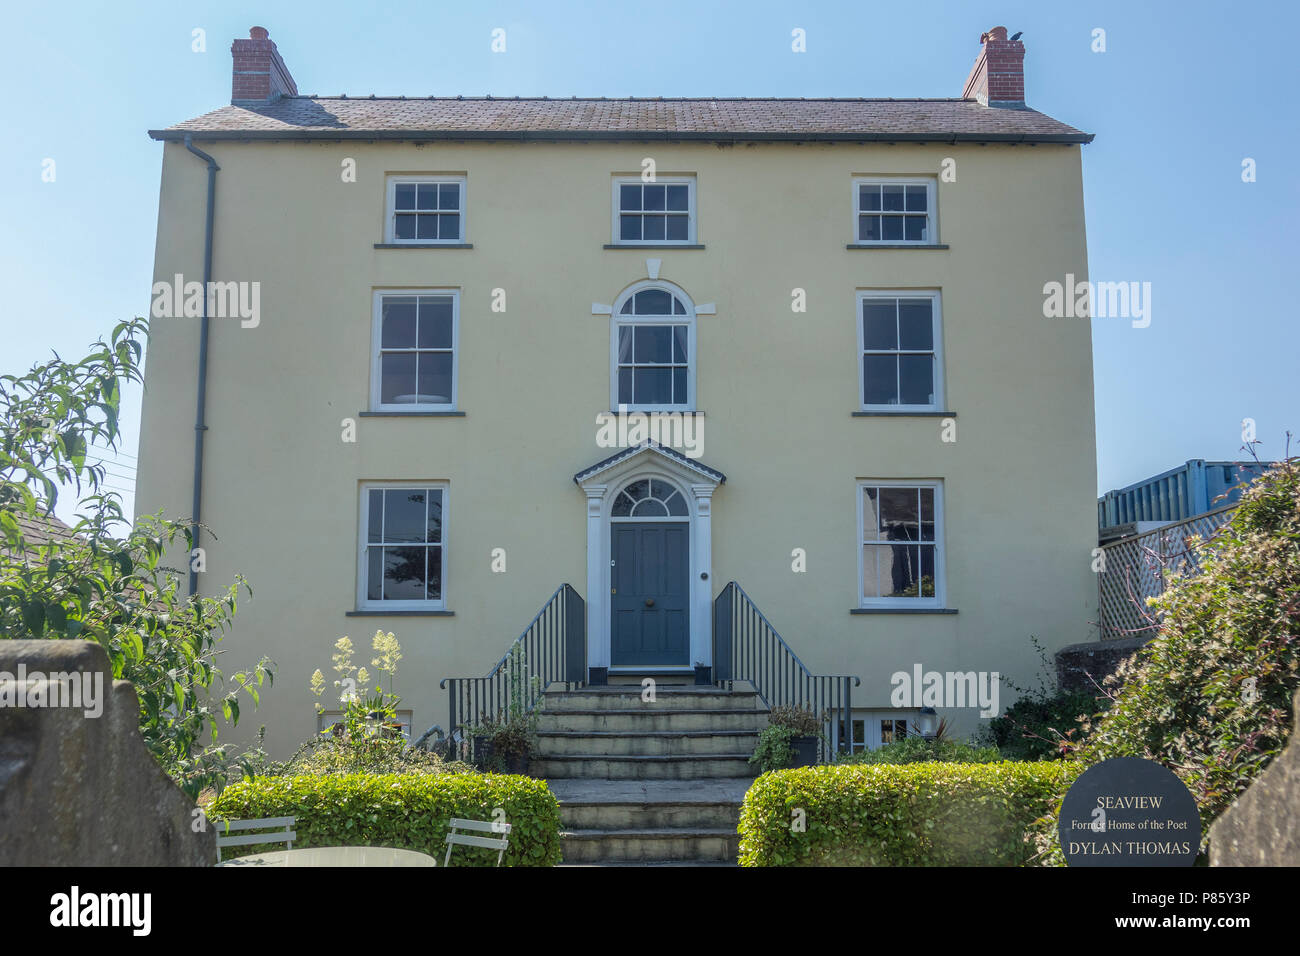 Wales, Carmarthenshire, Laugharne, Seaview, former home of Dylan Thomas Stock Photo